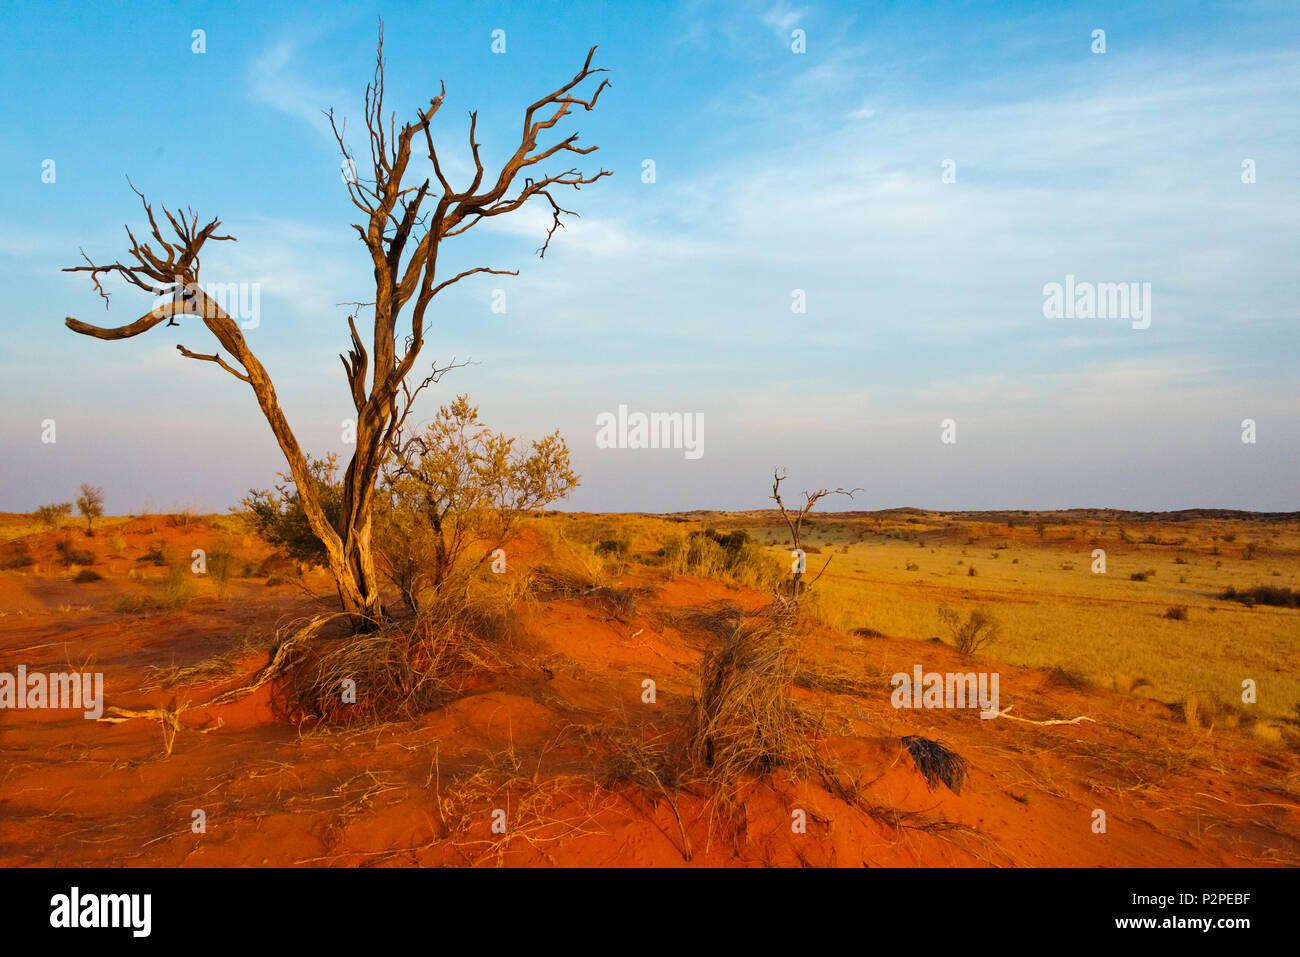 Dead tree on red sand desert, Kgalagadi Transfrontier Park, South Africa Stock Photo